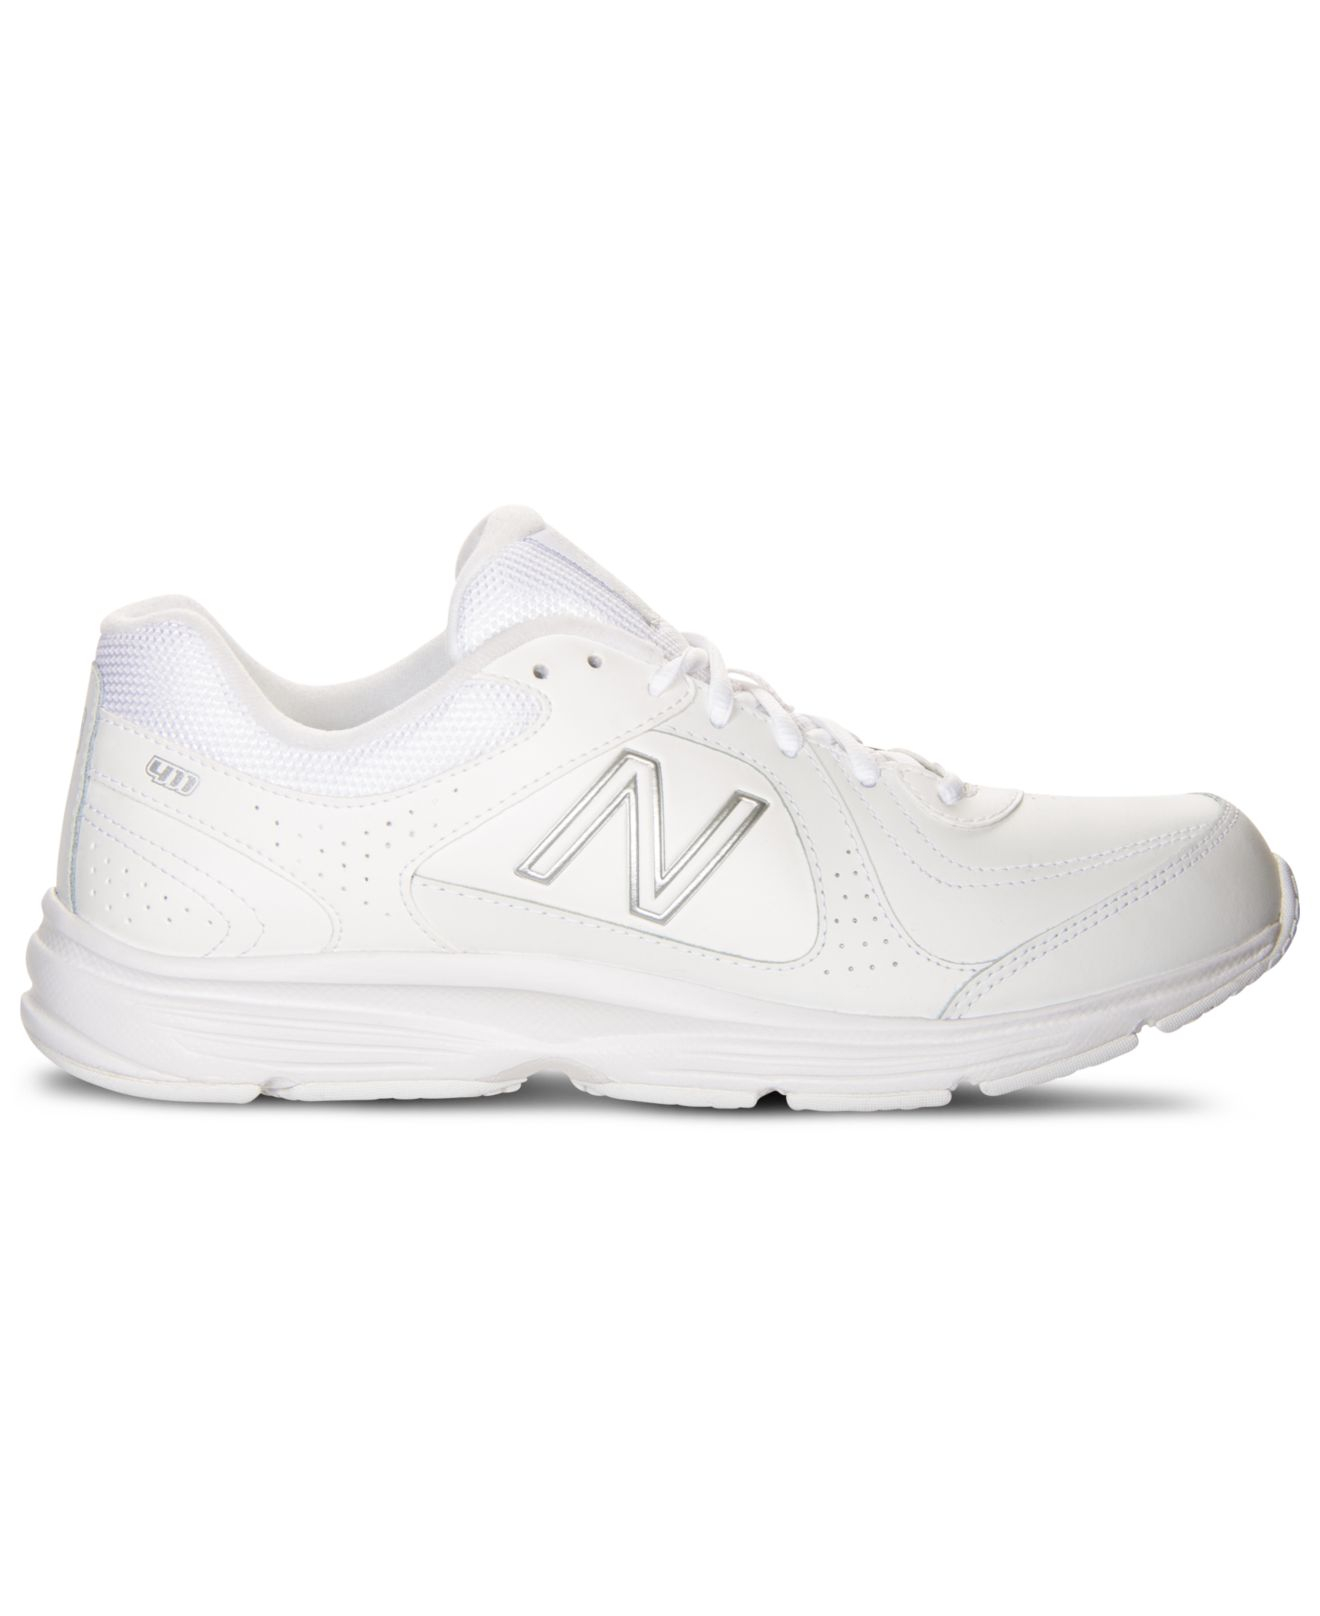 Lyst - New balance Men'S 411 Walking Sneakers From Finish Line in White ...